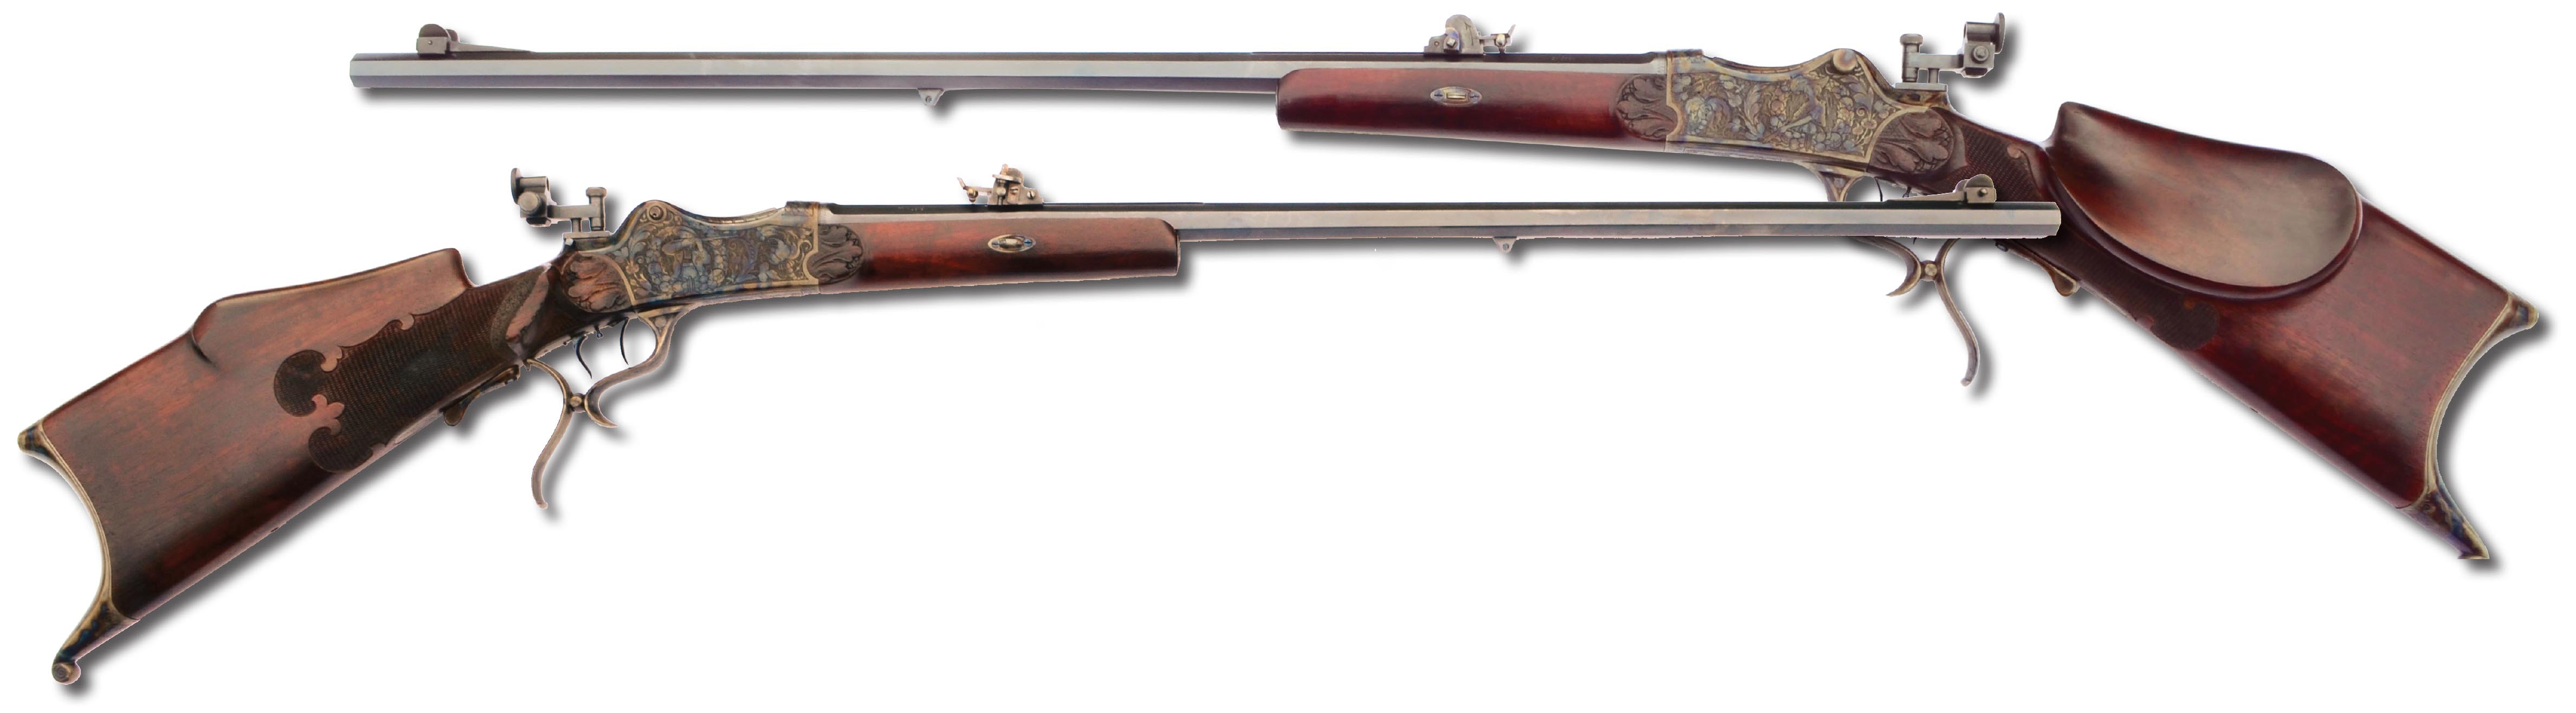 This German Schützen rifle (probably built before 1914) on the German Martini action is chambered in 8.15x46R. The name on the barrel is “Gust. Will, Zwickau,” but whether he was the maker or just the retailer is impossible to say.